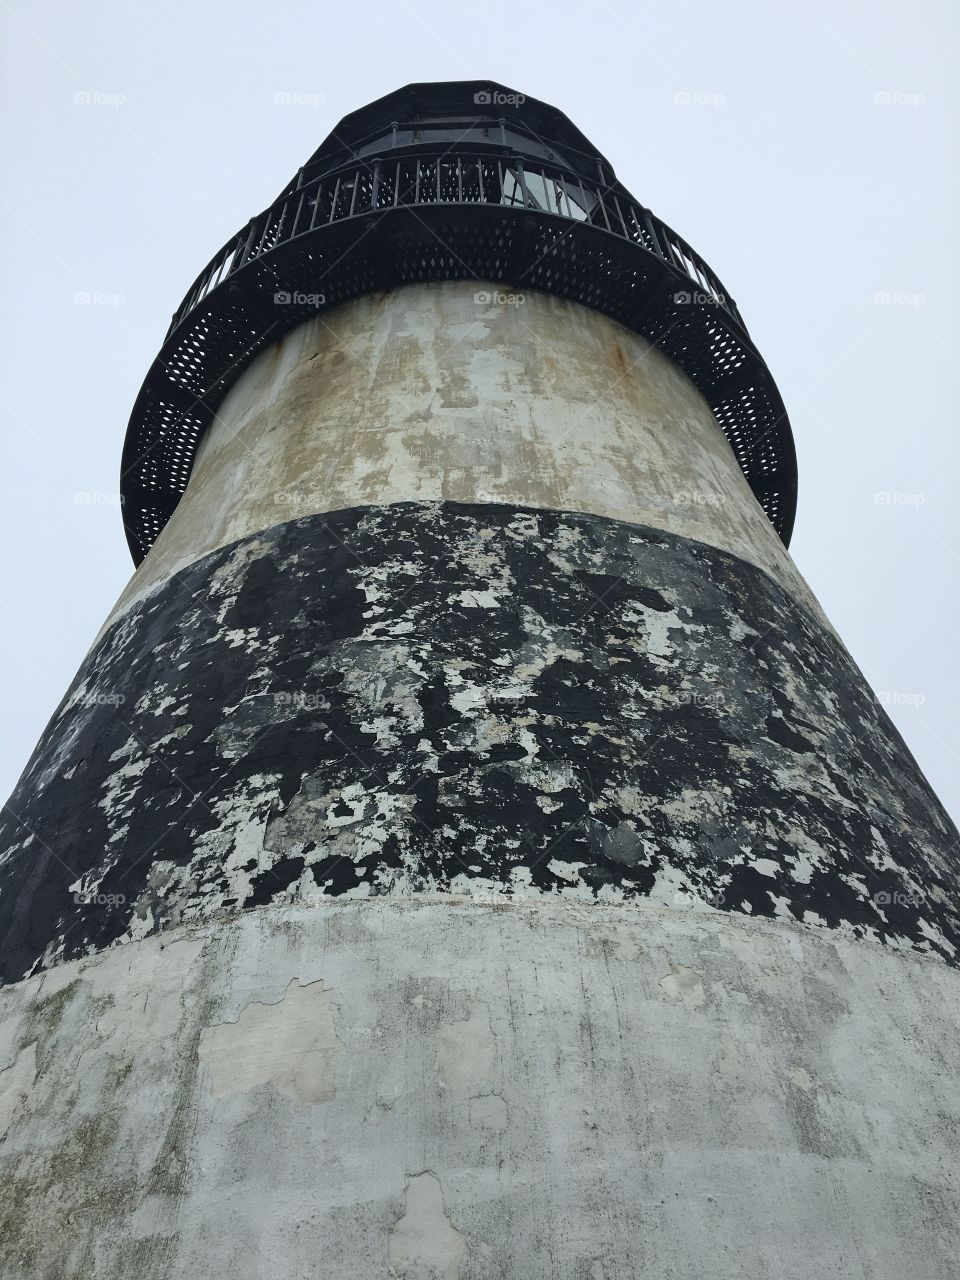 Cape Disappointment lighthouse 